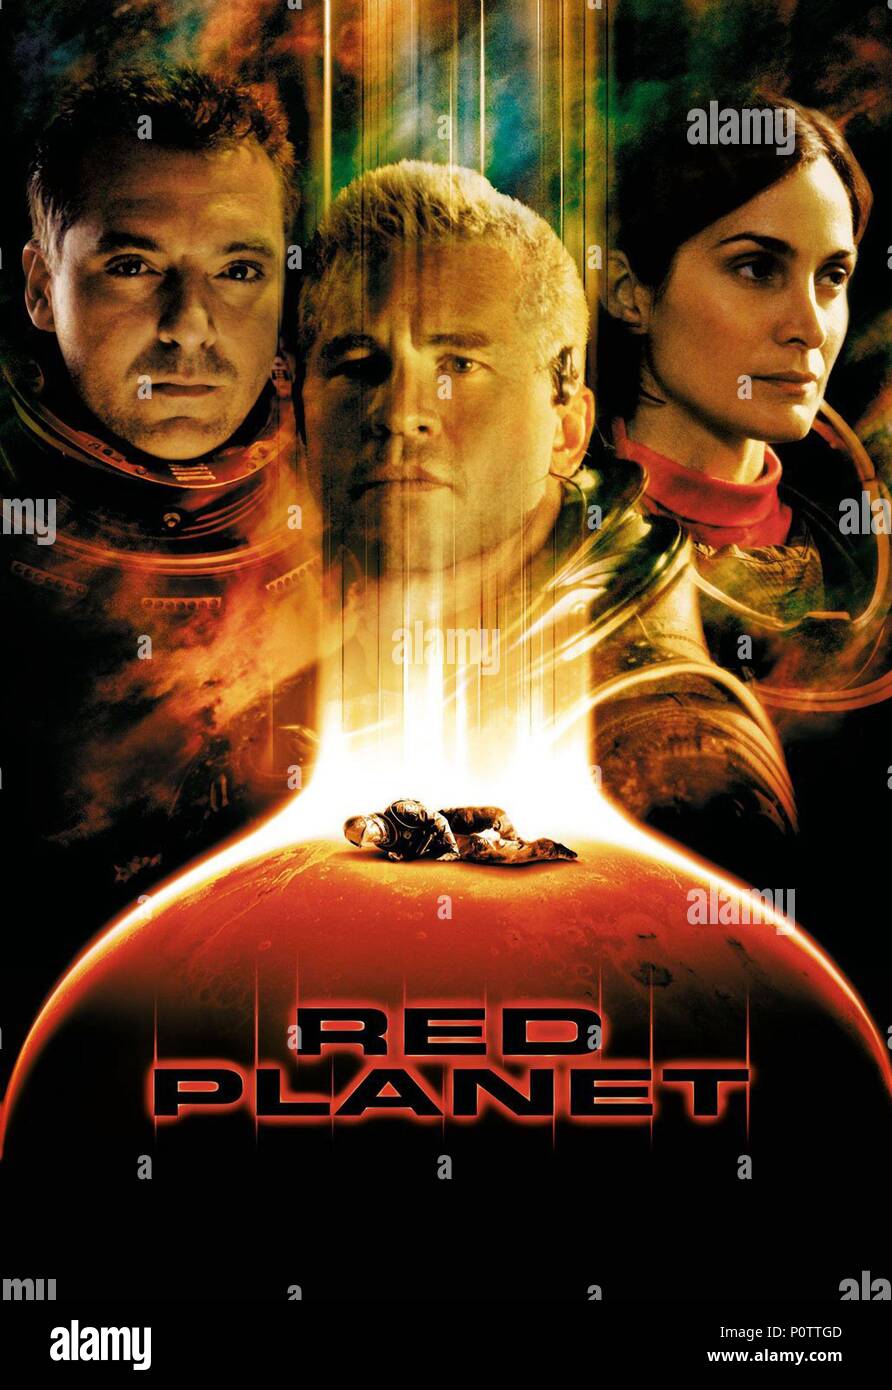 Original Film Title: RED PLANET.  English Title: RED PLANET.  Film Director: ANTHONY HOFFMAN.  Year: 2000. Credit: WARNER BROS. PICTURES / Album Stock Photo